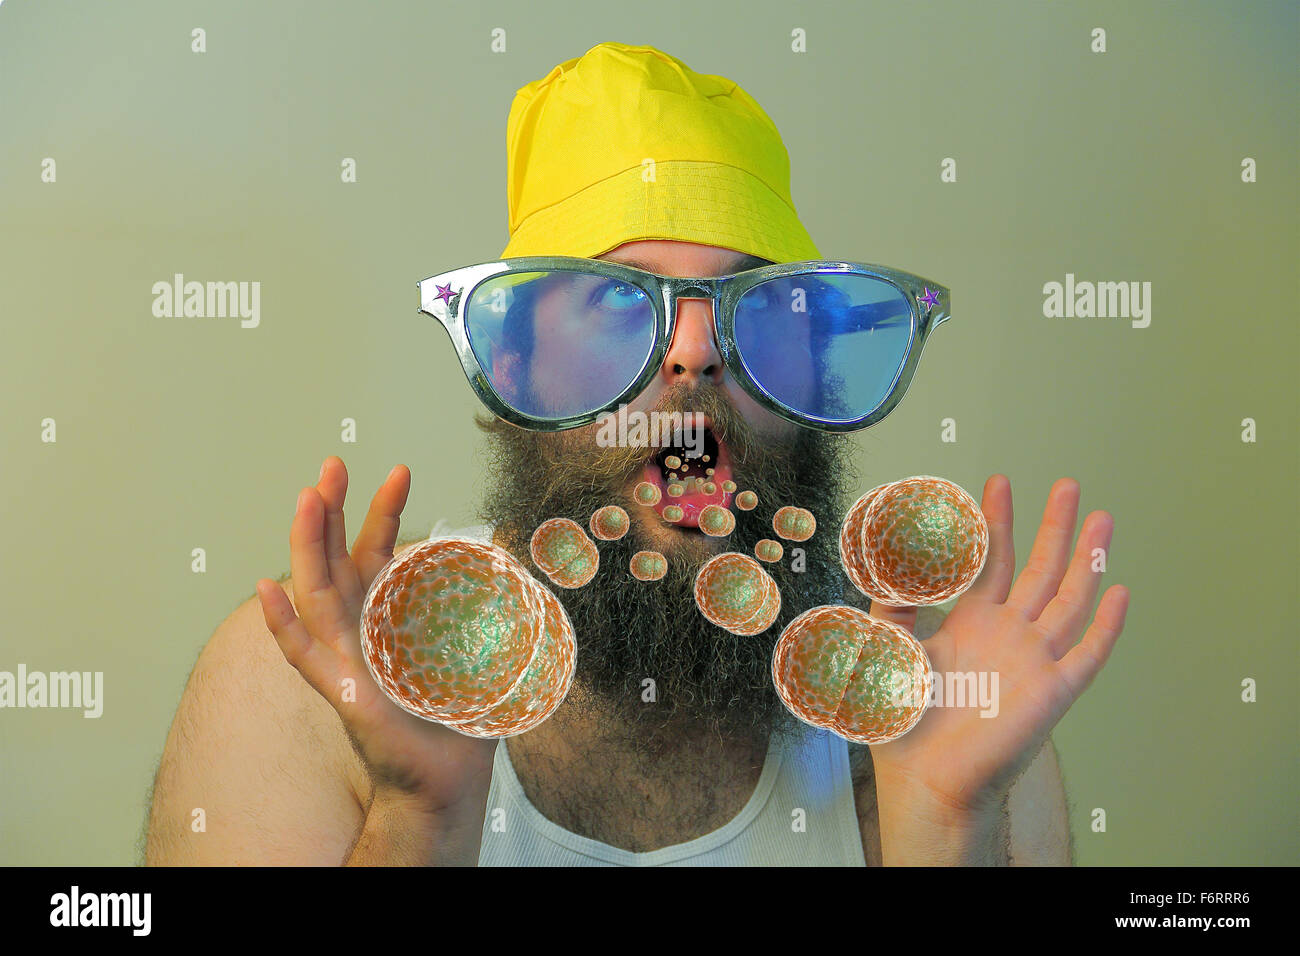 Bacteria virus sickness pouring out sick bearded mans open mouth Stock Photo